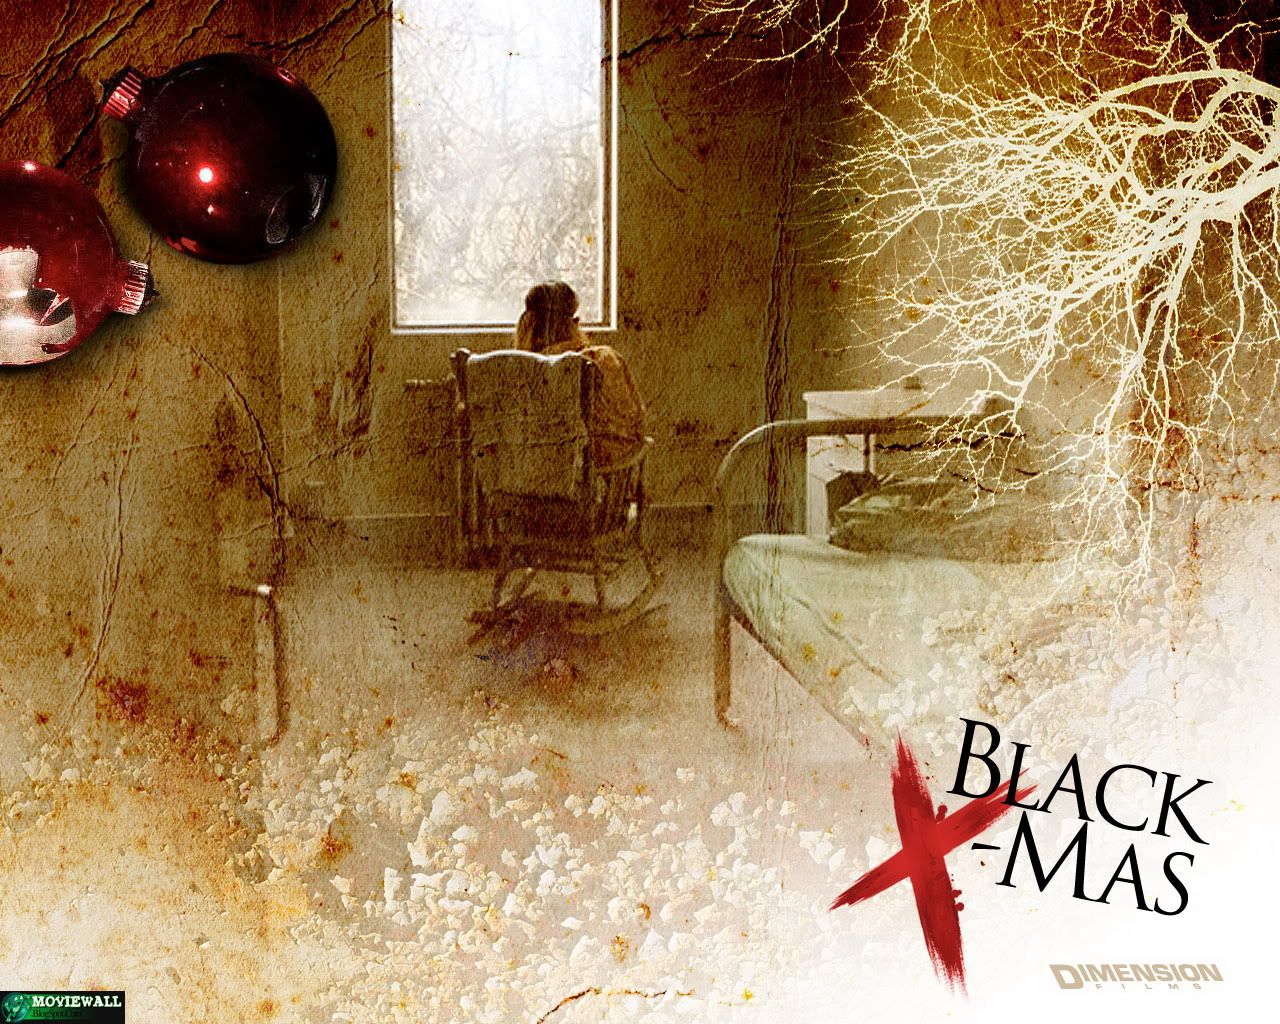 Moviewall - Movie Posters, Wallpapers & Trailers.: Black Christmas.